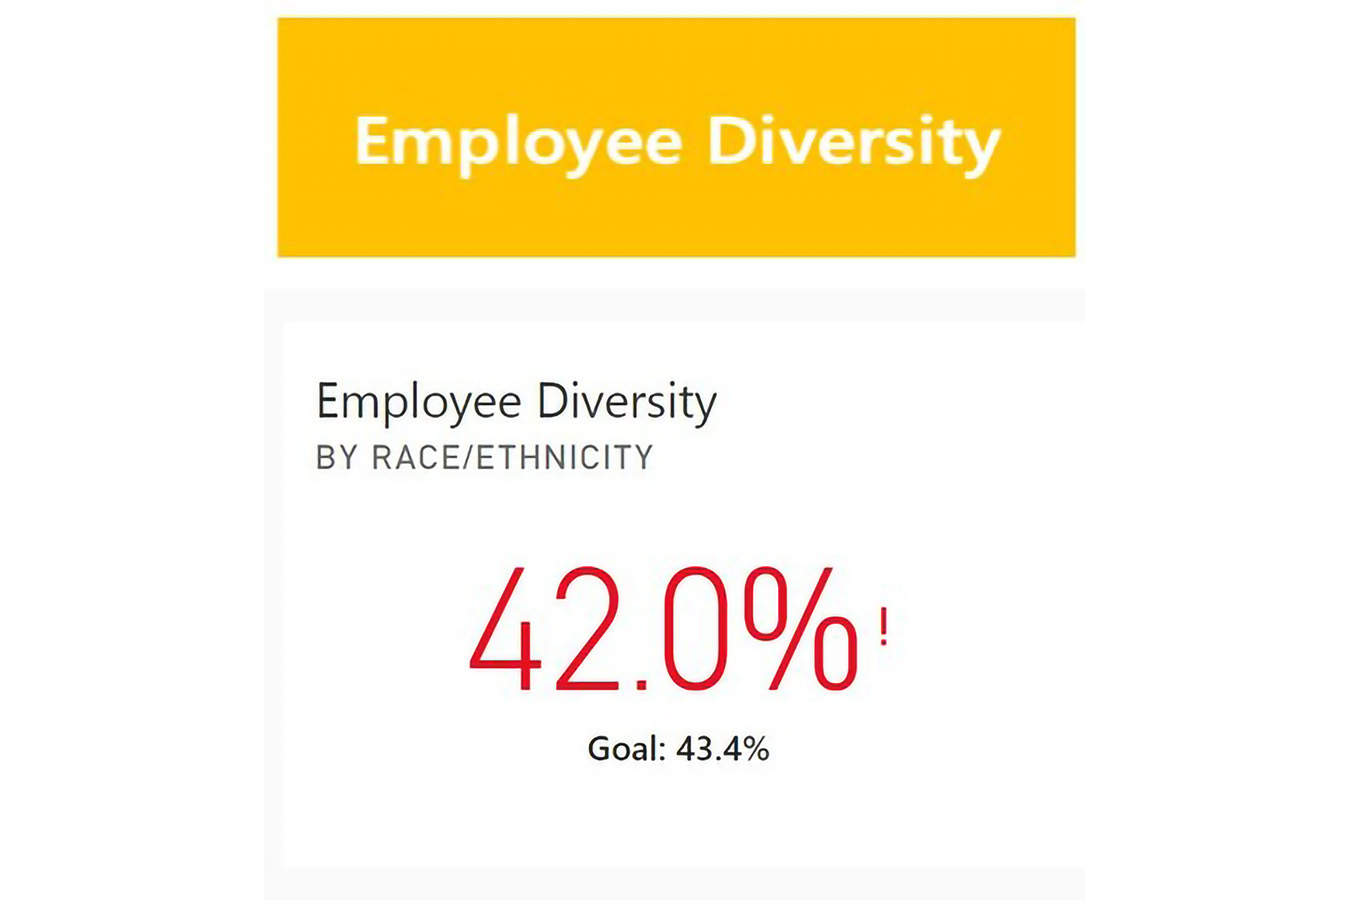 Employee diversity is at 42%, short of the goal of 43.4%